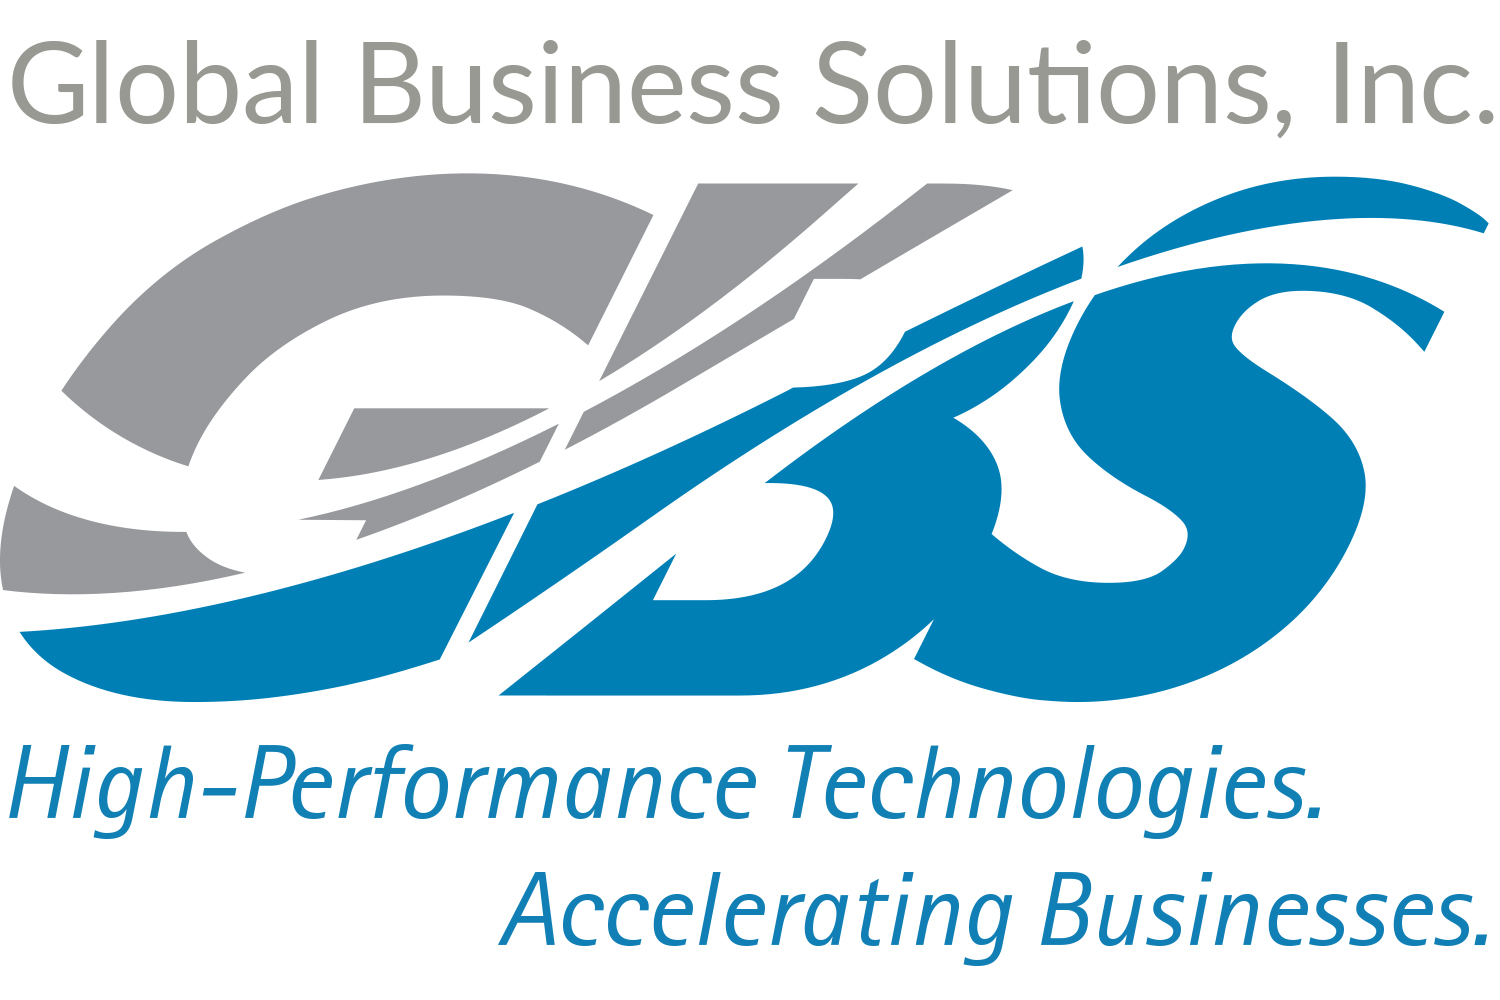 GBS - Global Business Solutions, Inc.